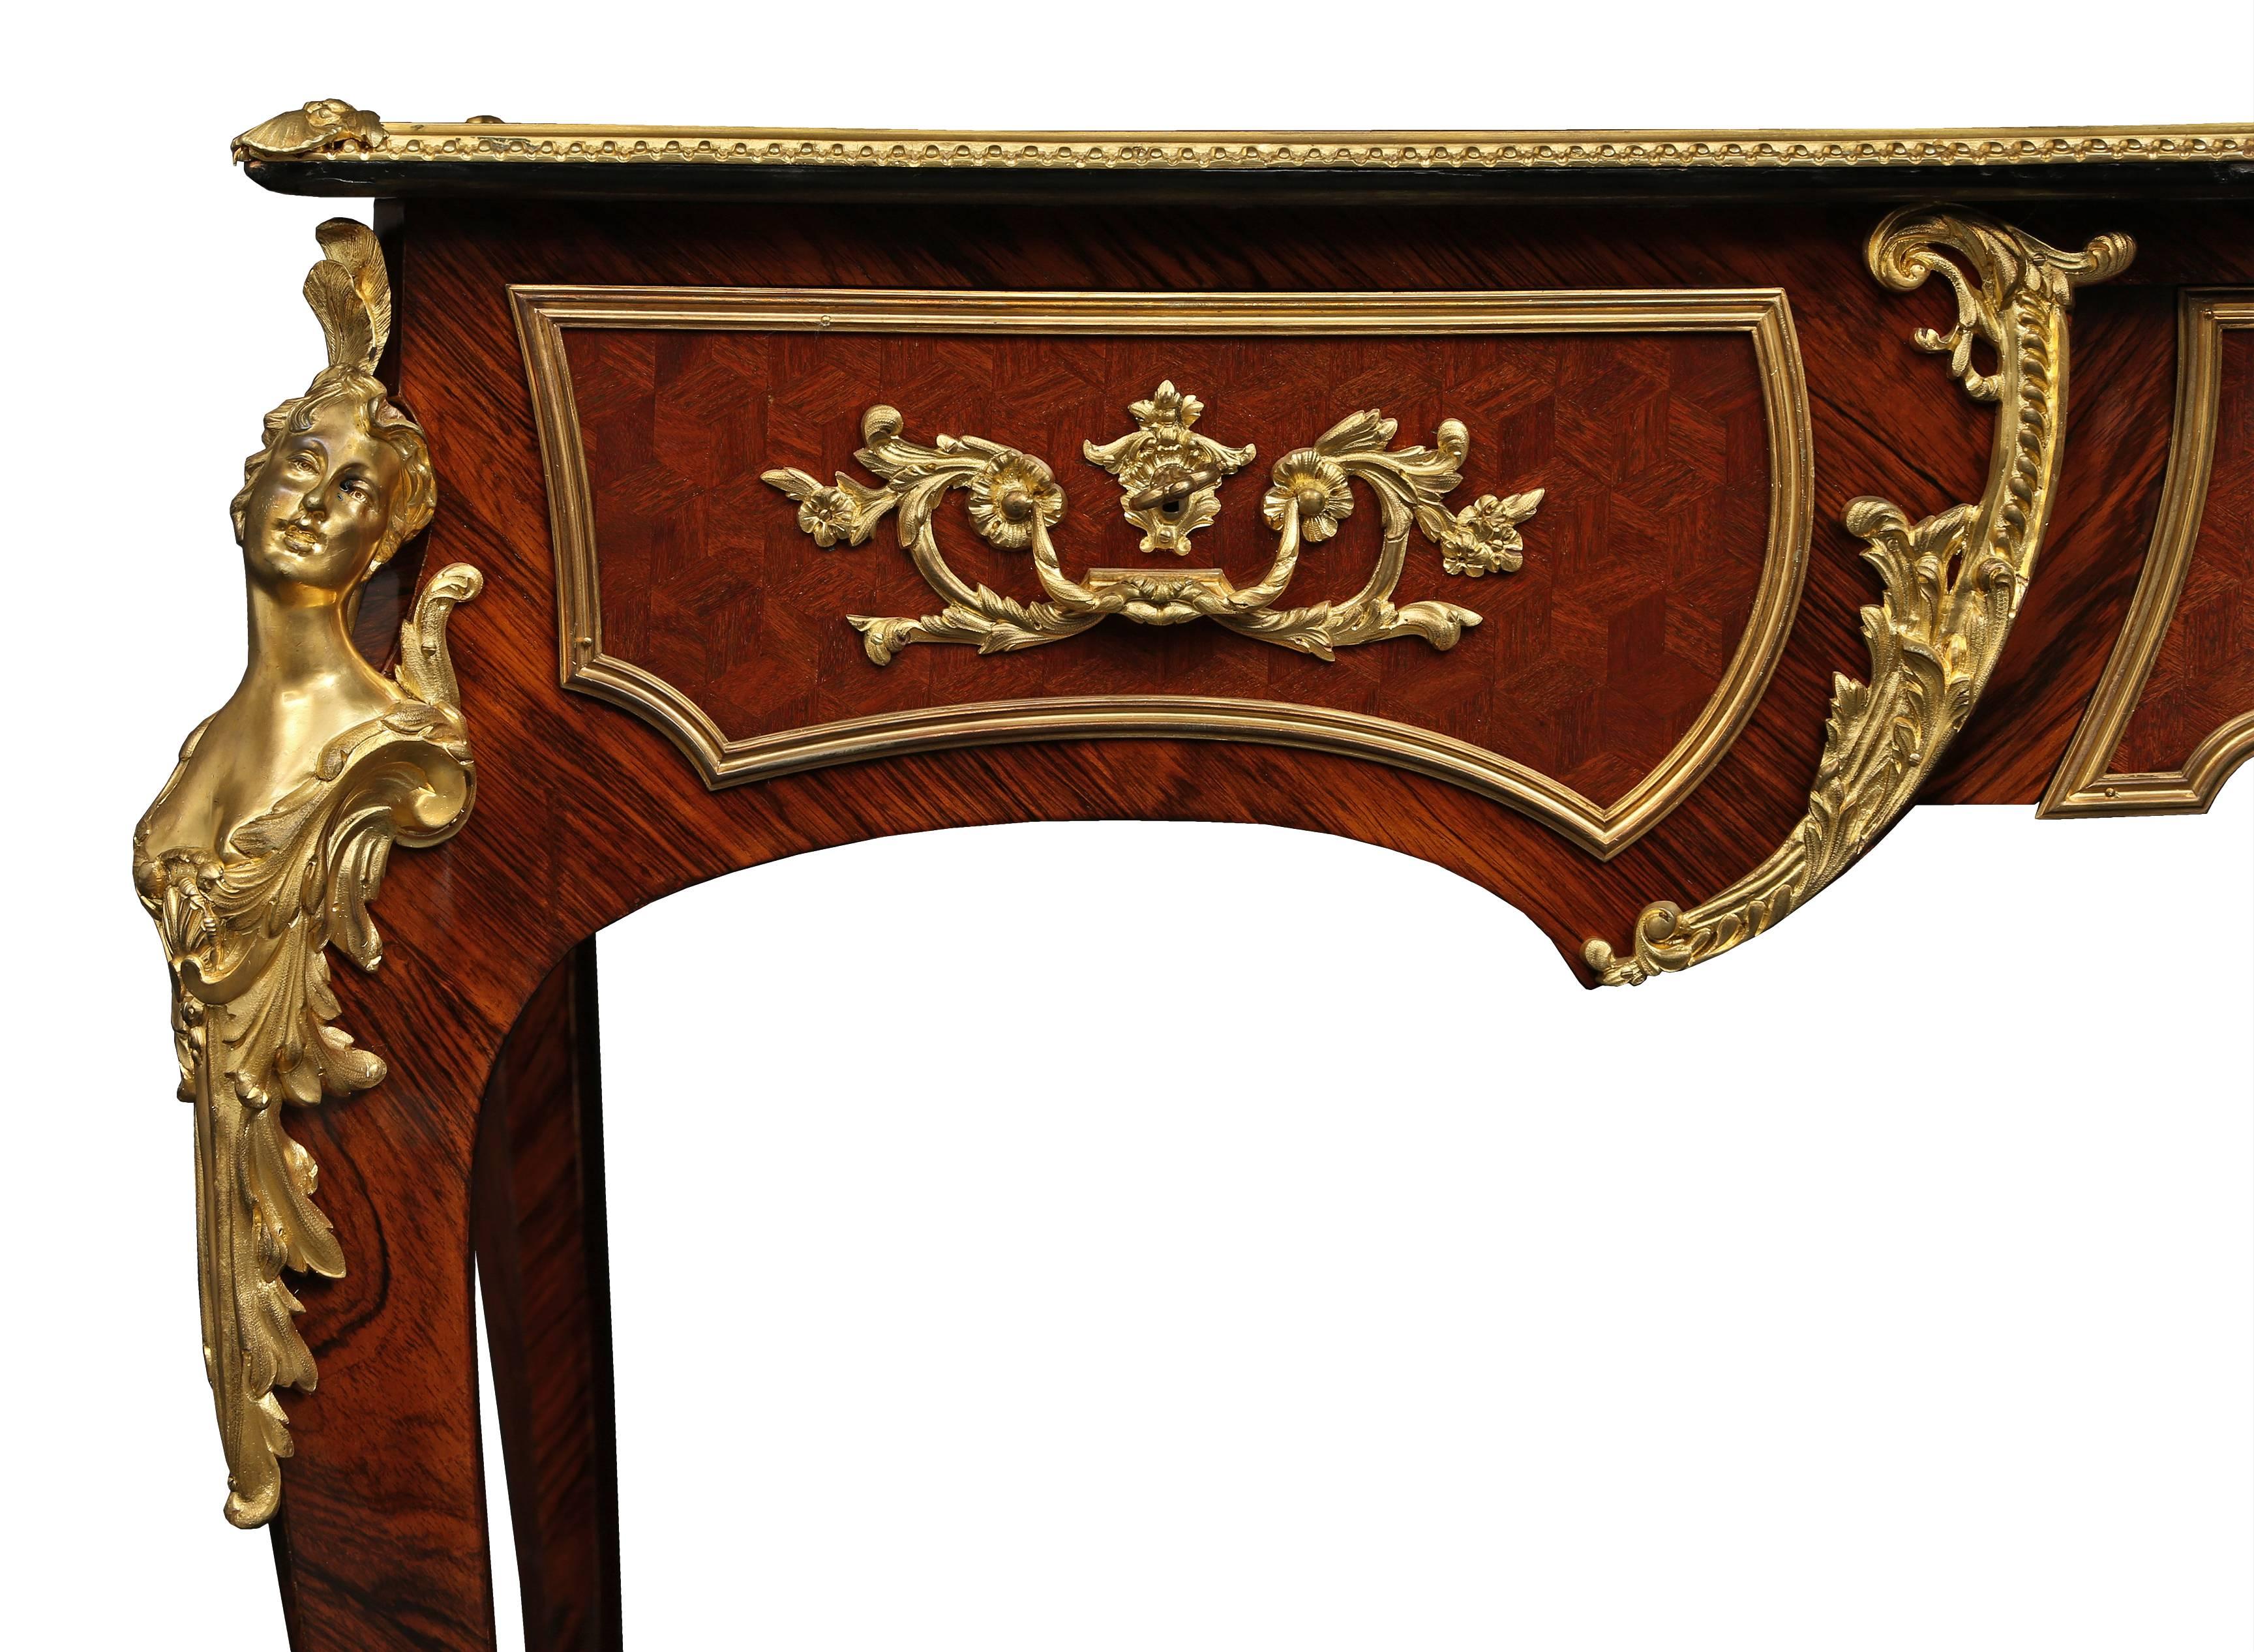 Kingwood French 19th Century Bureau Plat and Desk Chair, Possibly by François Linke